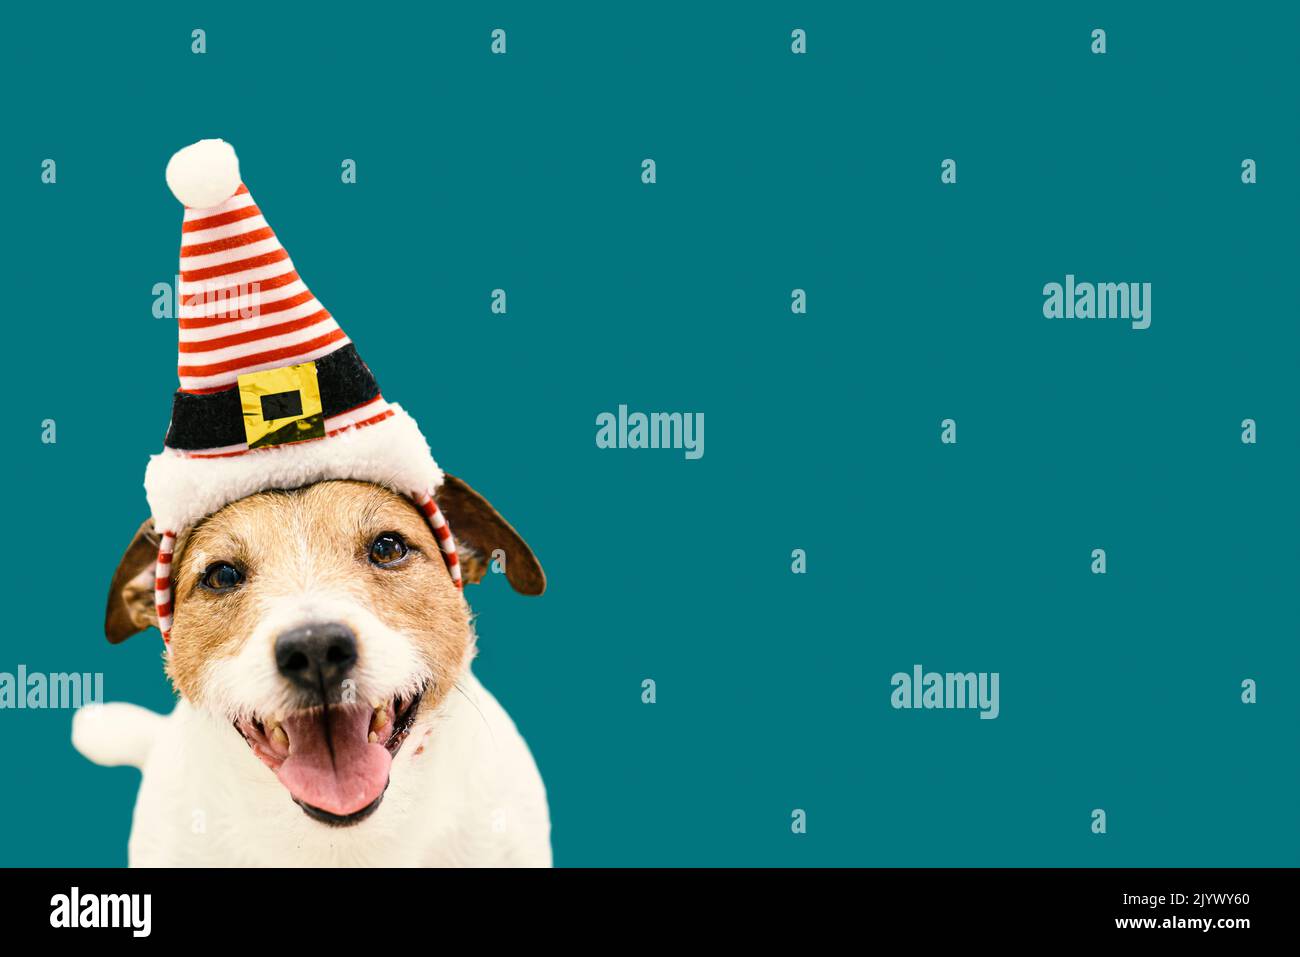 Funny happy dog wearing Elf's hat. Christmas and New Year background Stock Photo